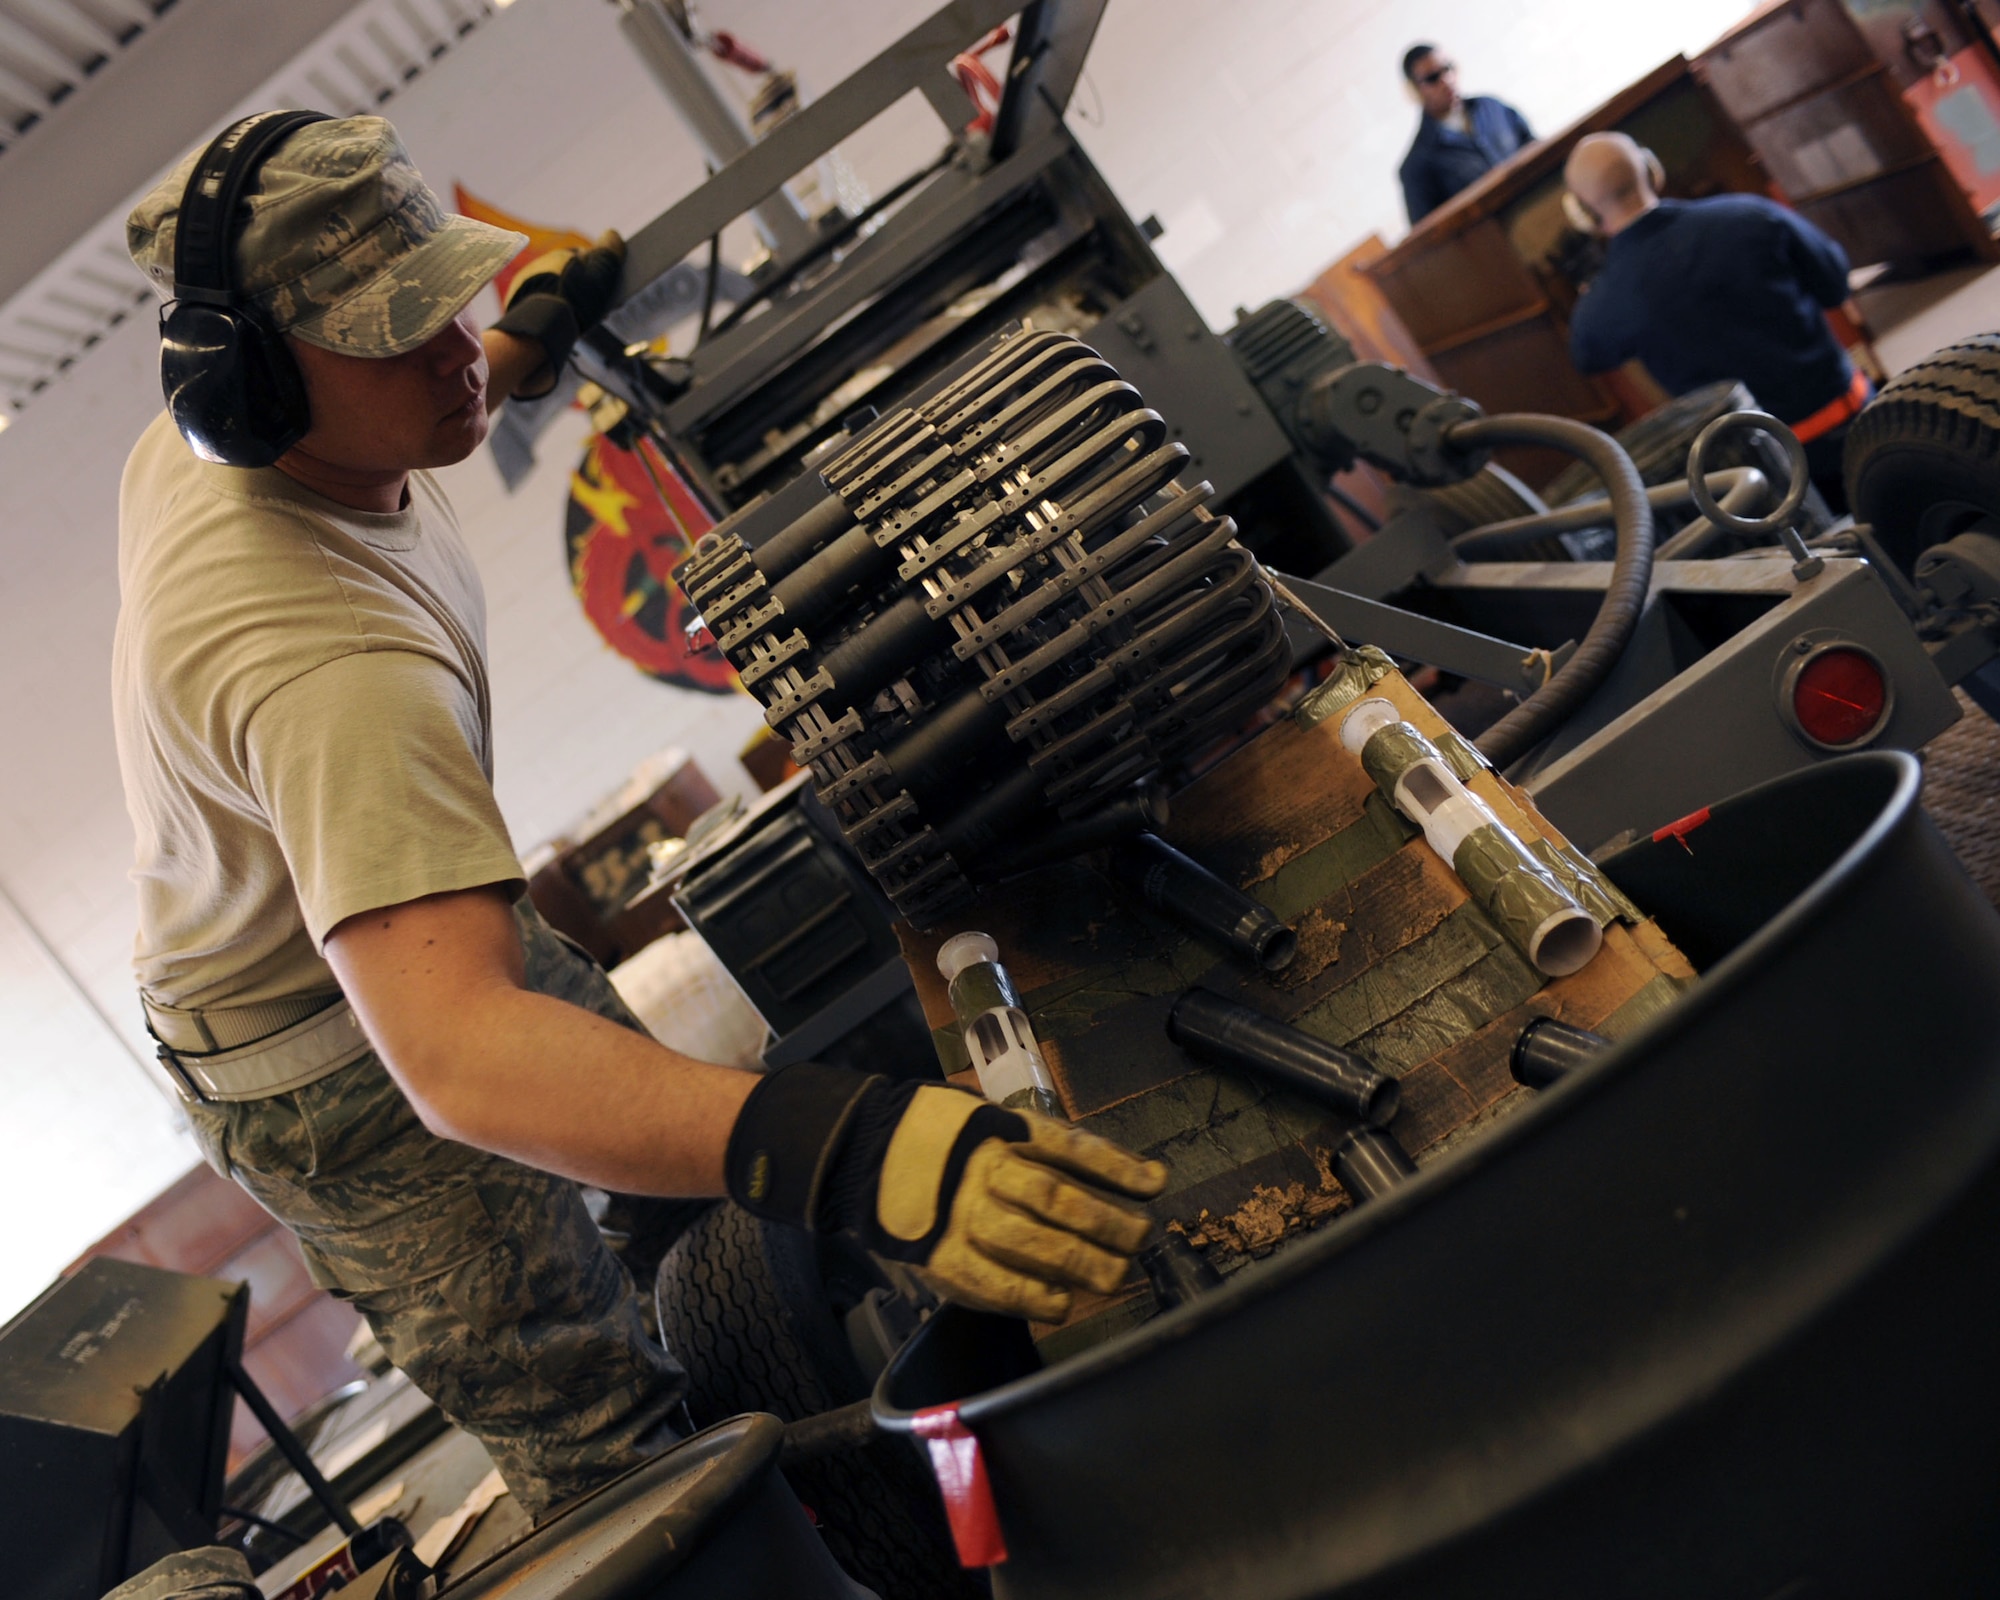 U.S. Air Force Staff Sgt. Brent Stockton, 355th Equipment Maintenance Squadron sorts rounds as they come out of the GFU-7 on Davis-Monthan Air Force Base, Ariz., Feb. 8, 2012. (U.S. Air Force photo by Airman 1st Class Christine Griffiths/Released) 